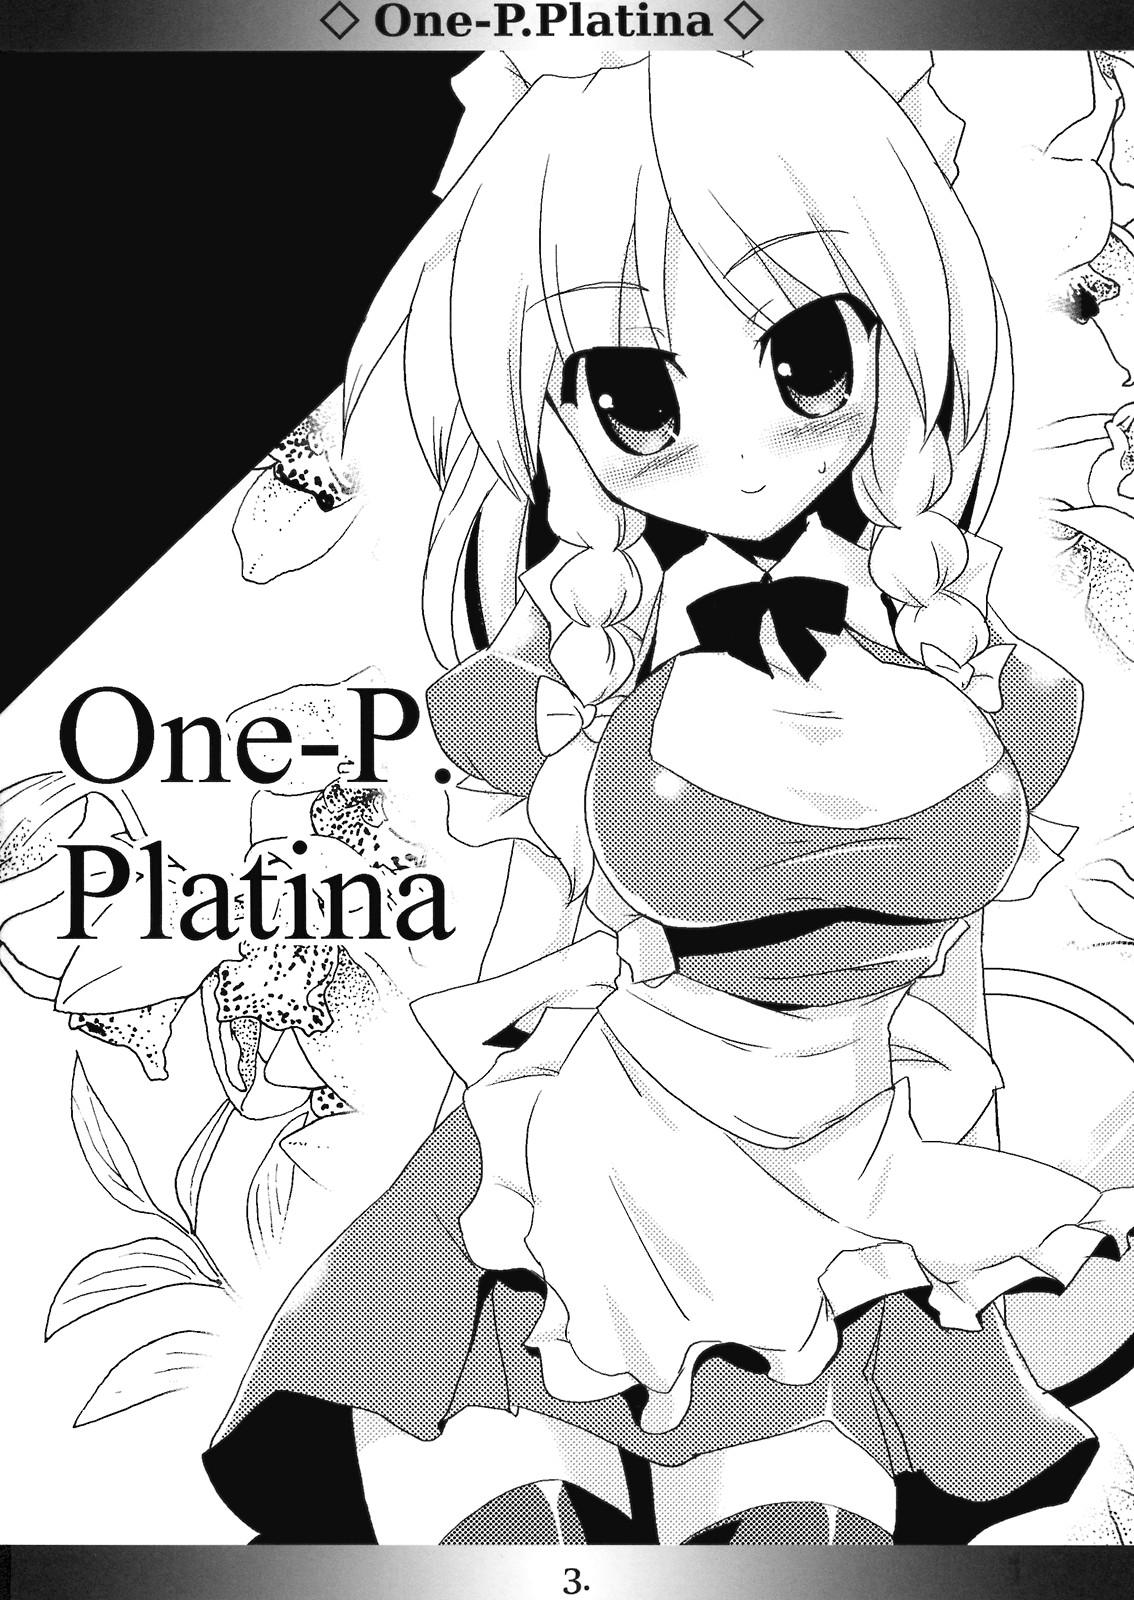 Outdoor One-P.Platina - Touhou project Submissive - Page 3